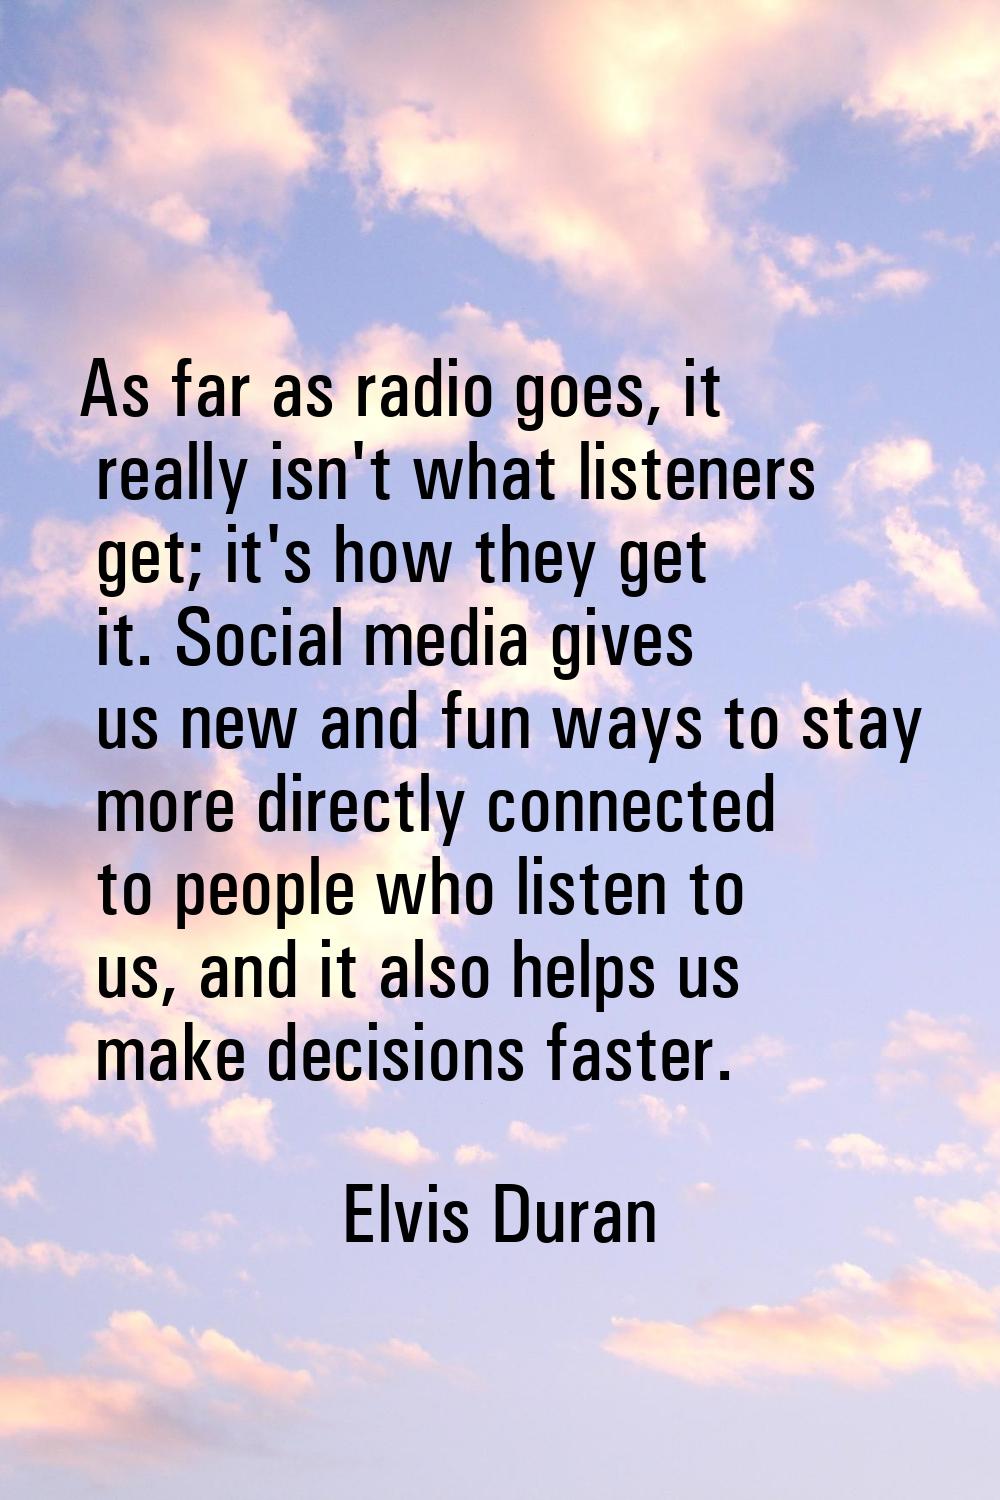 As far as radio goes, it really isn't what listeners get; it's how they get it. Social media gives 